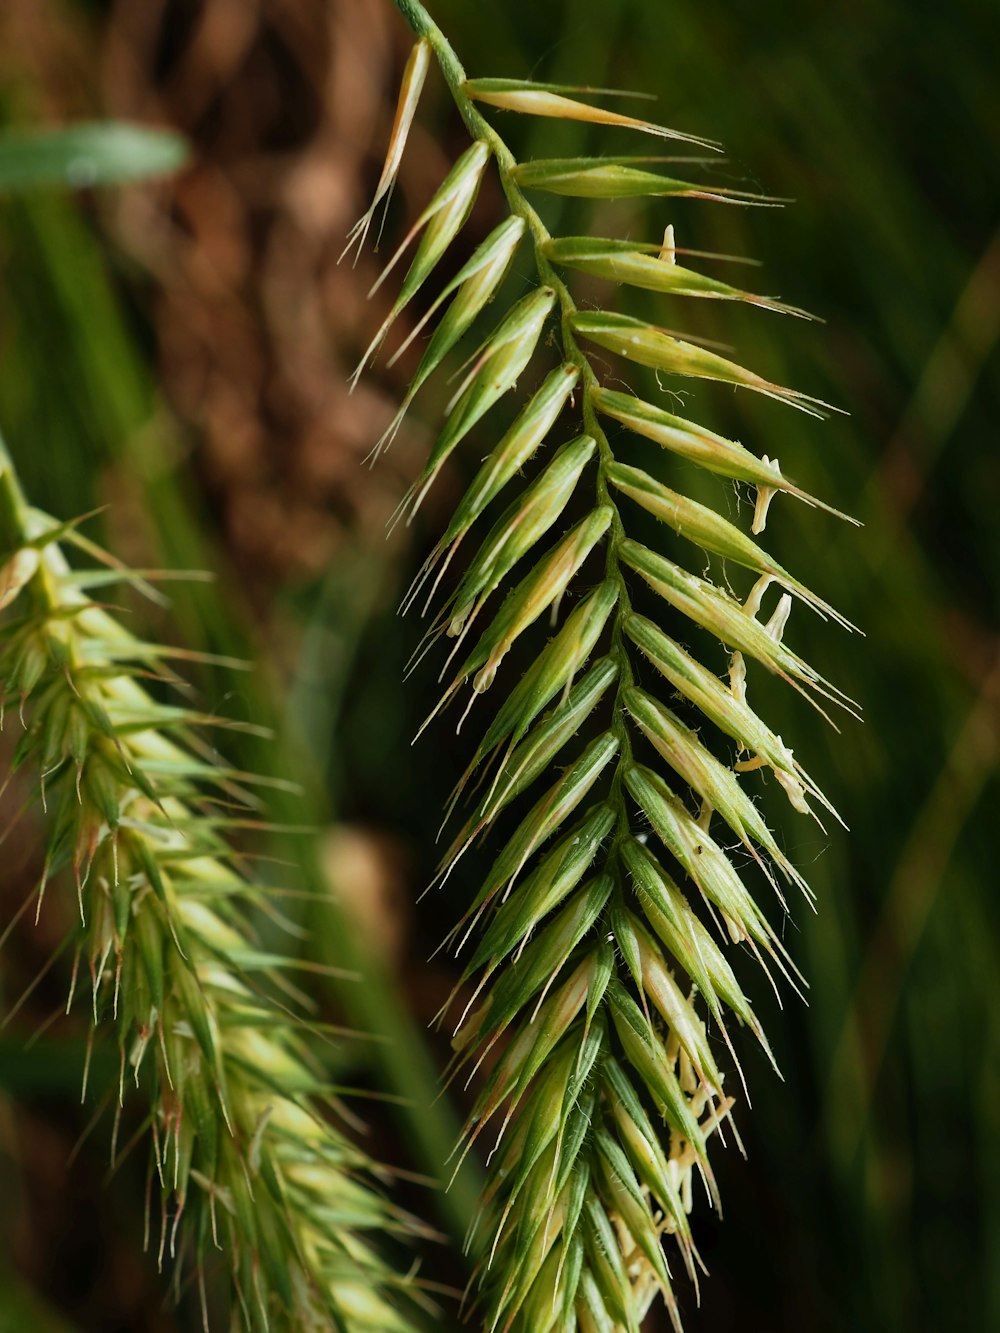 a close up of a green plant with long needles